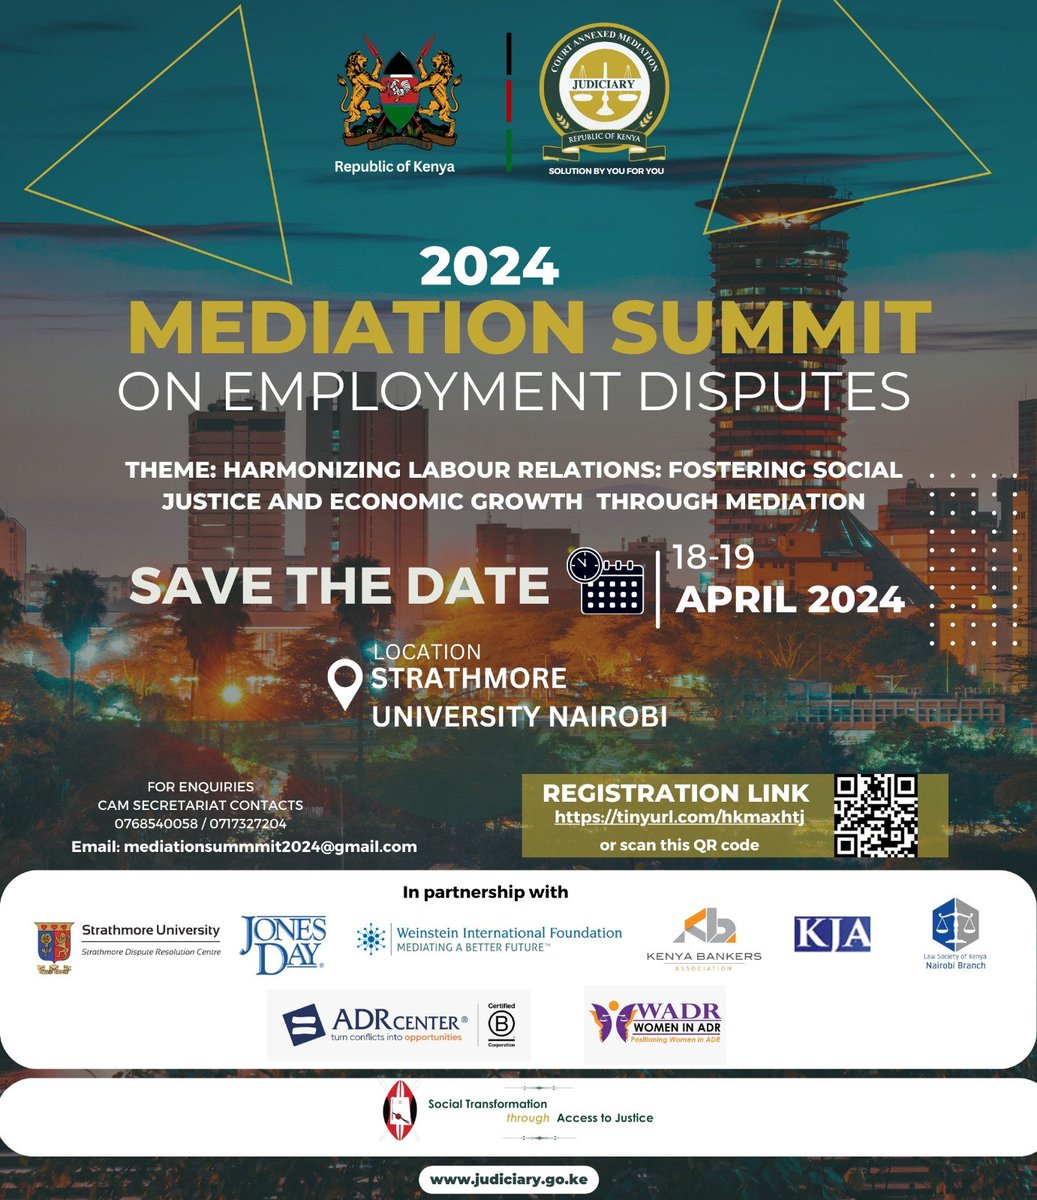 We extend an invitation to you for the upcoming 2nd Annual Mediation Summit scheduled to take place on 18th to 19th April 2024 at Strathmore University. 

Please take a moment to register on this link: tinyurl.com/hkmaxhtj

We look forward to your participation.